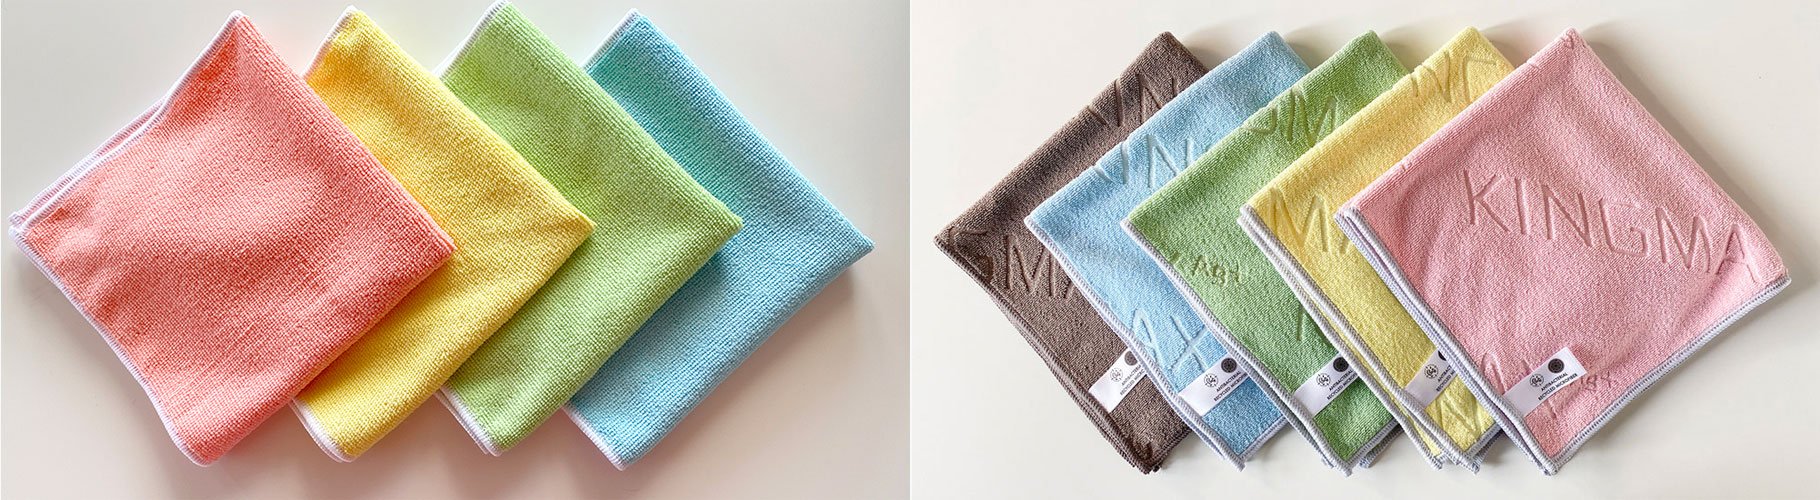 Certified with OEKO-TEX, KINGMAX GREAT TOWEL is an eco-friendly rPET towel made from recycled microfiber. Being as the qualified microfiber cloth manufacturer, KINGMAX supplies durable towel, antimicrobial cloth and bleachable towel to purchasers and wholesalers.